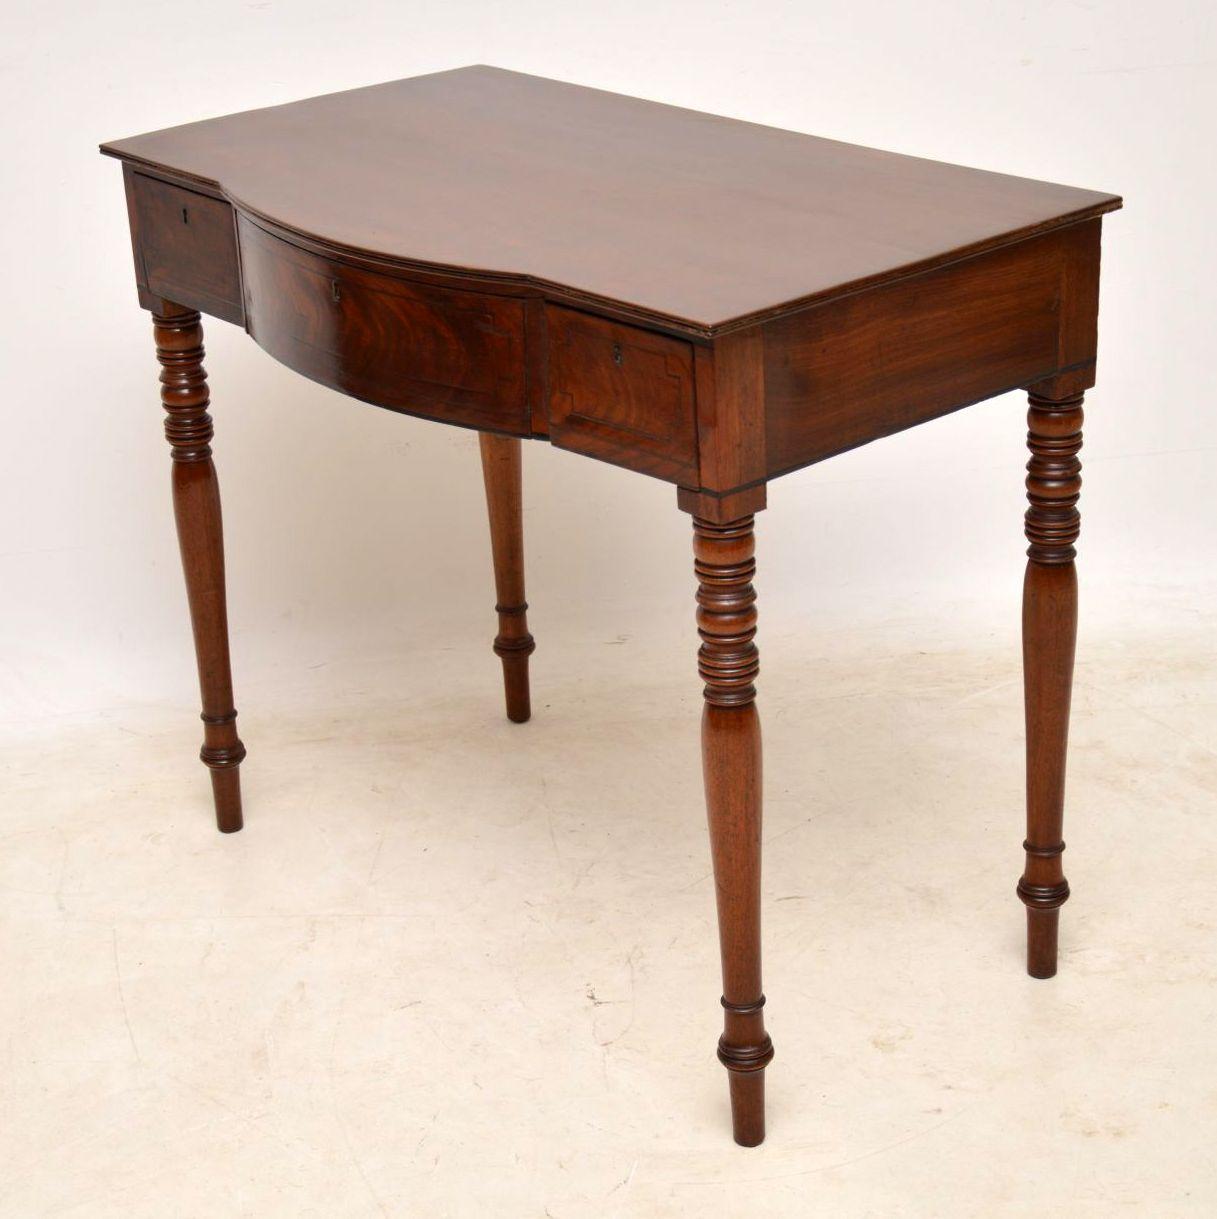 English Antique Mahogany Console Table or Desk